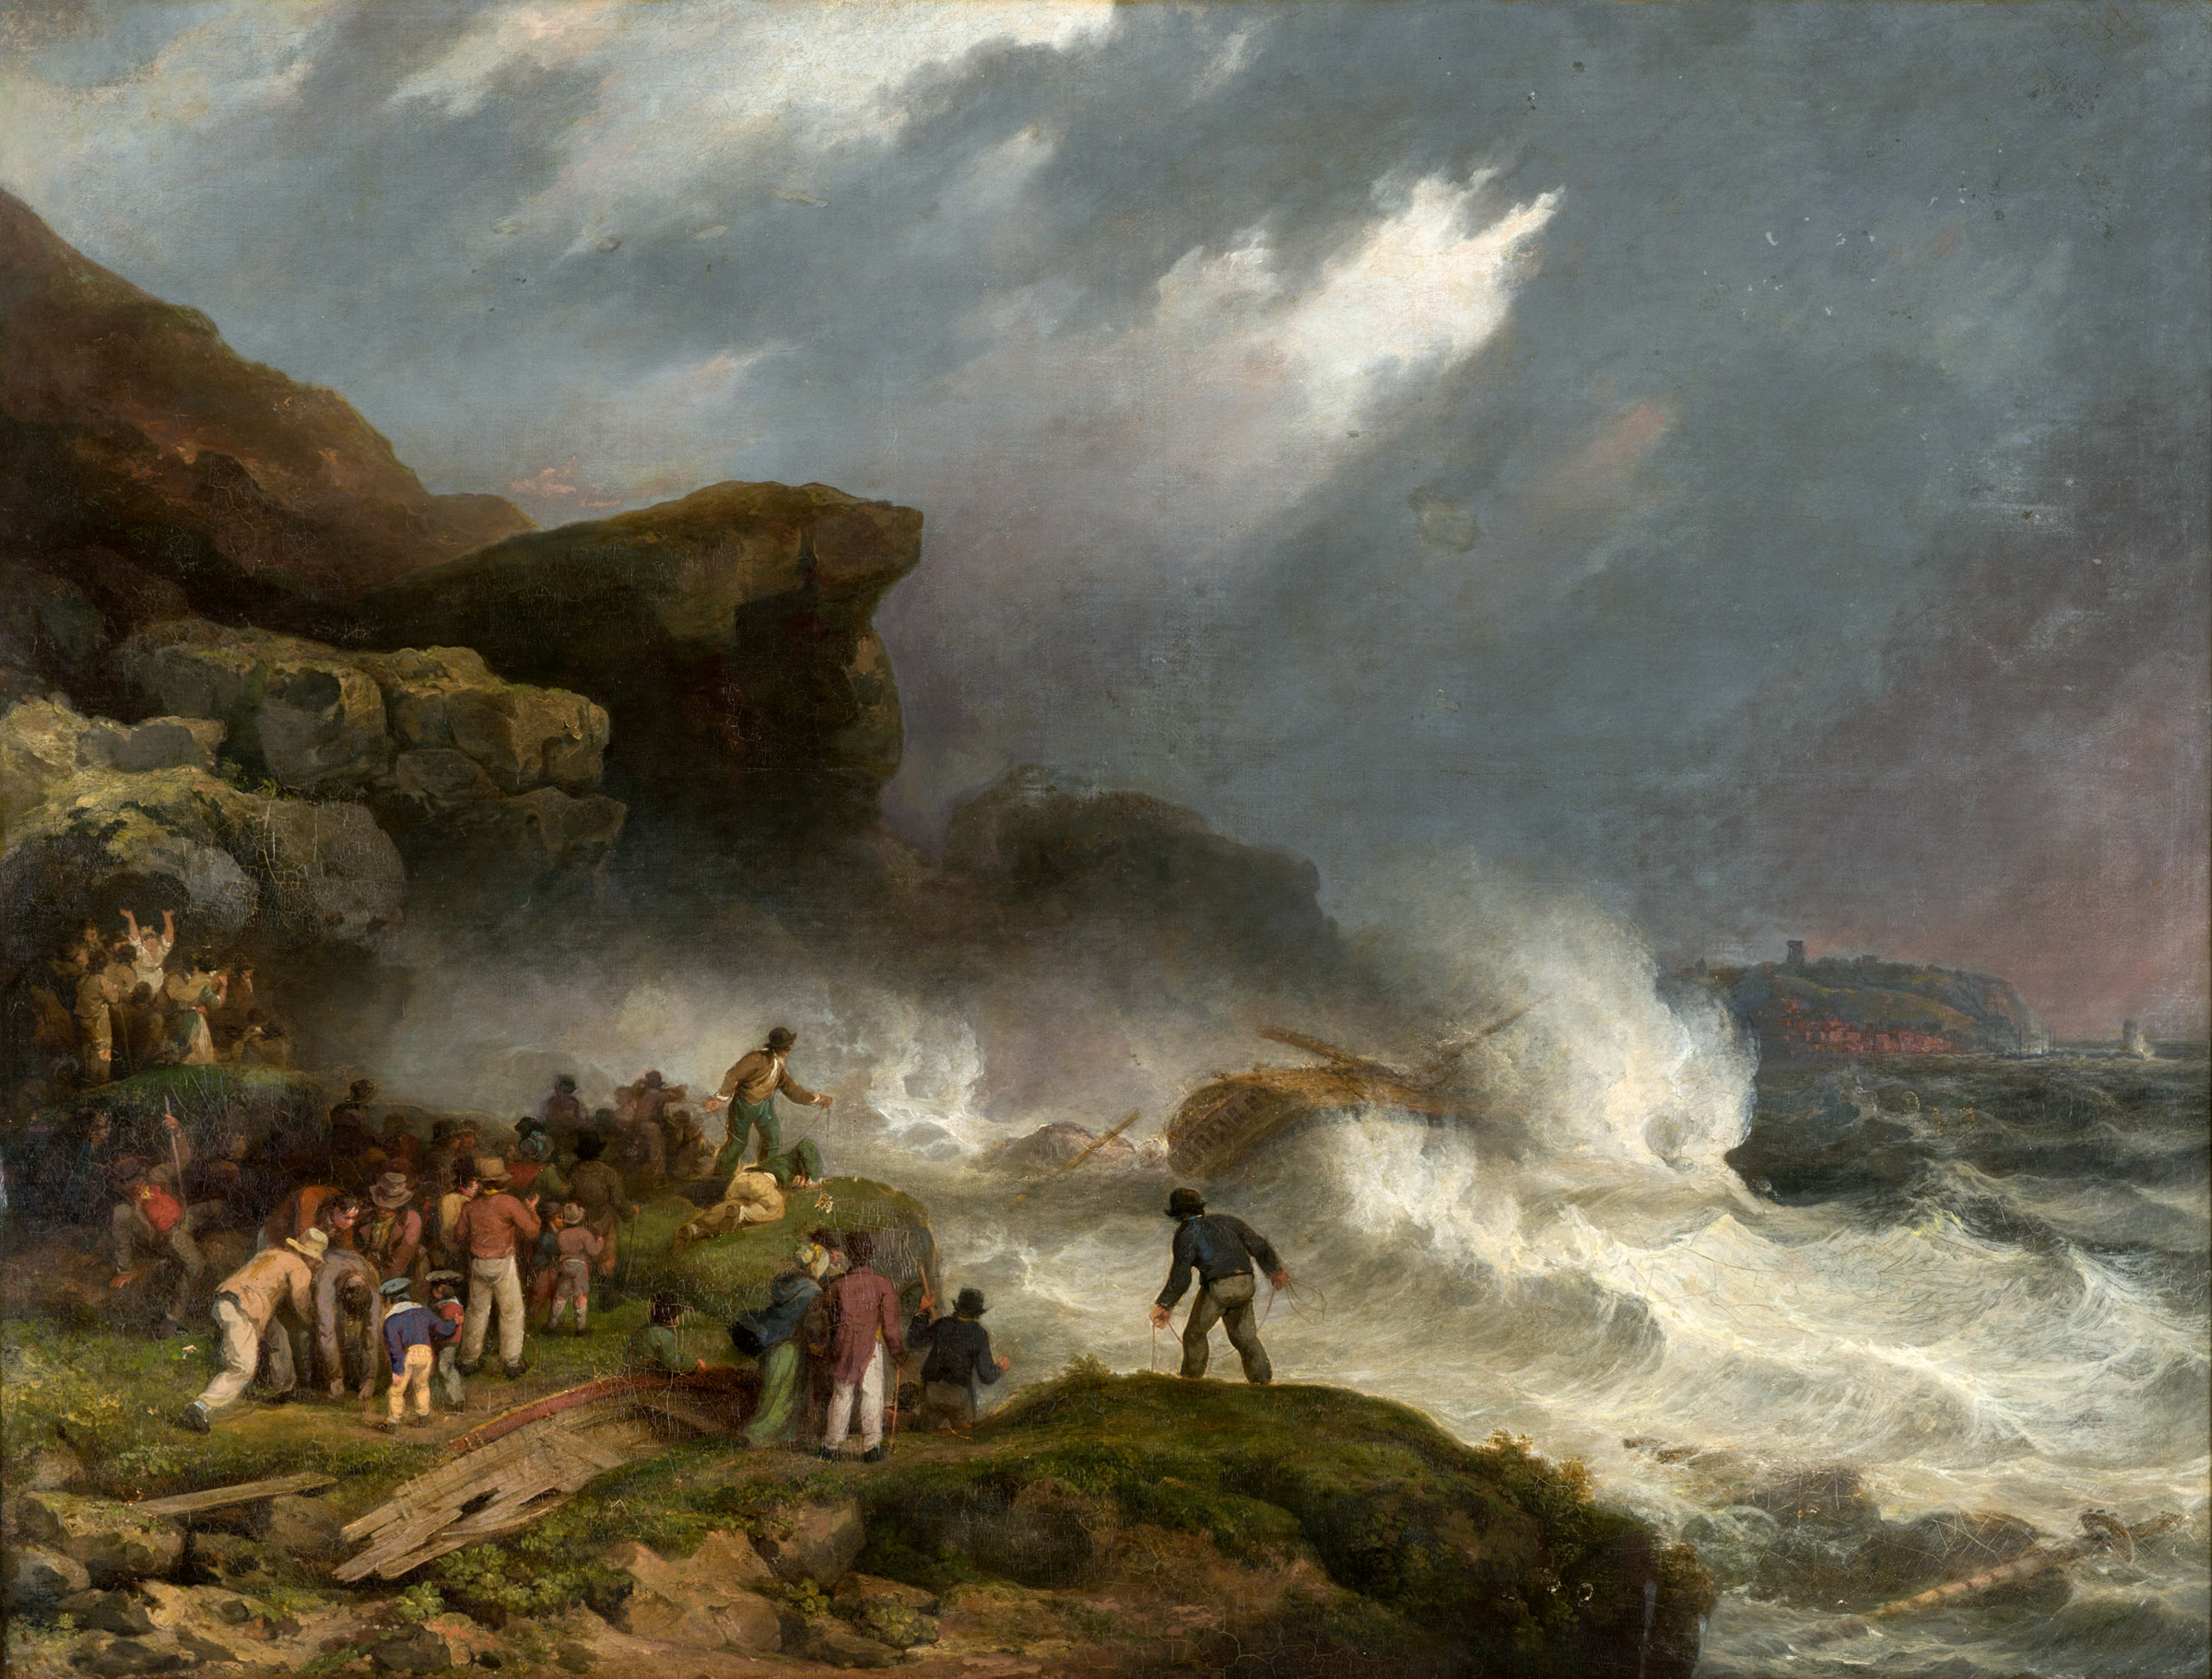 GEORGE MORLAND (1763-1804) WRECKERS ON THE COAST Oil on canvas 118 x 155.5cm. ++ Lined; craquelure